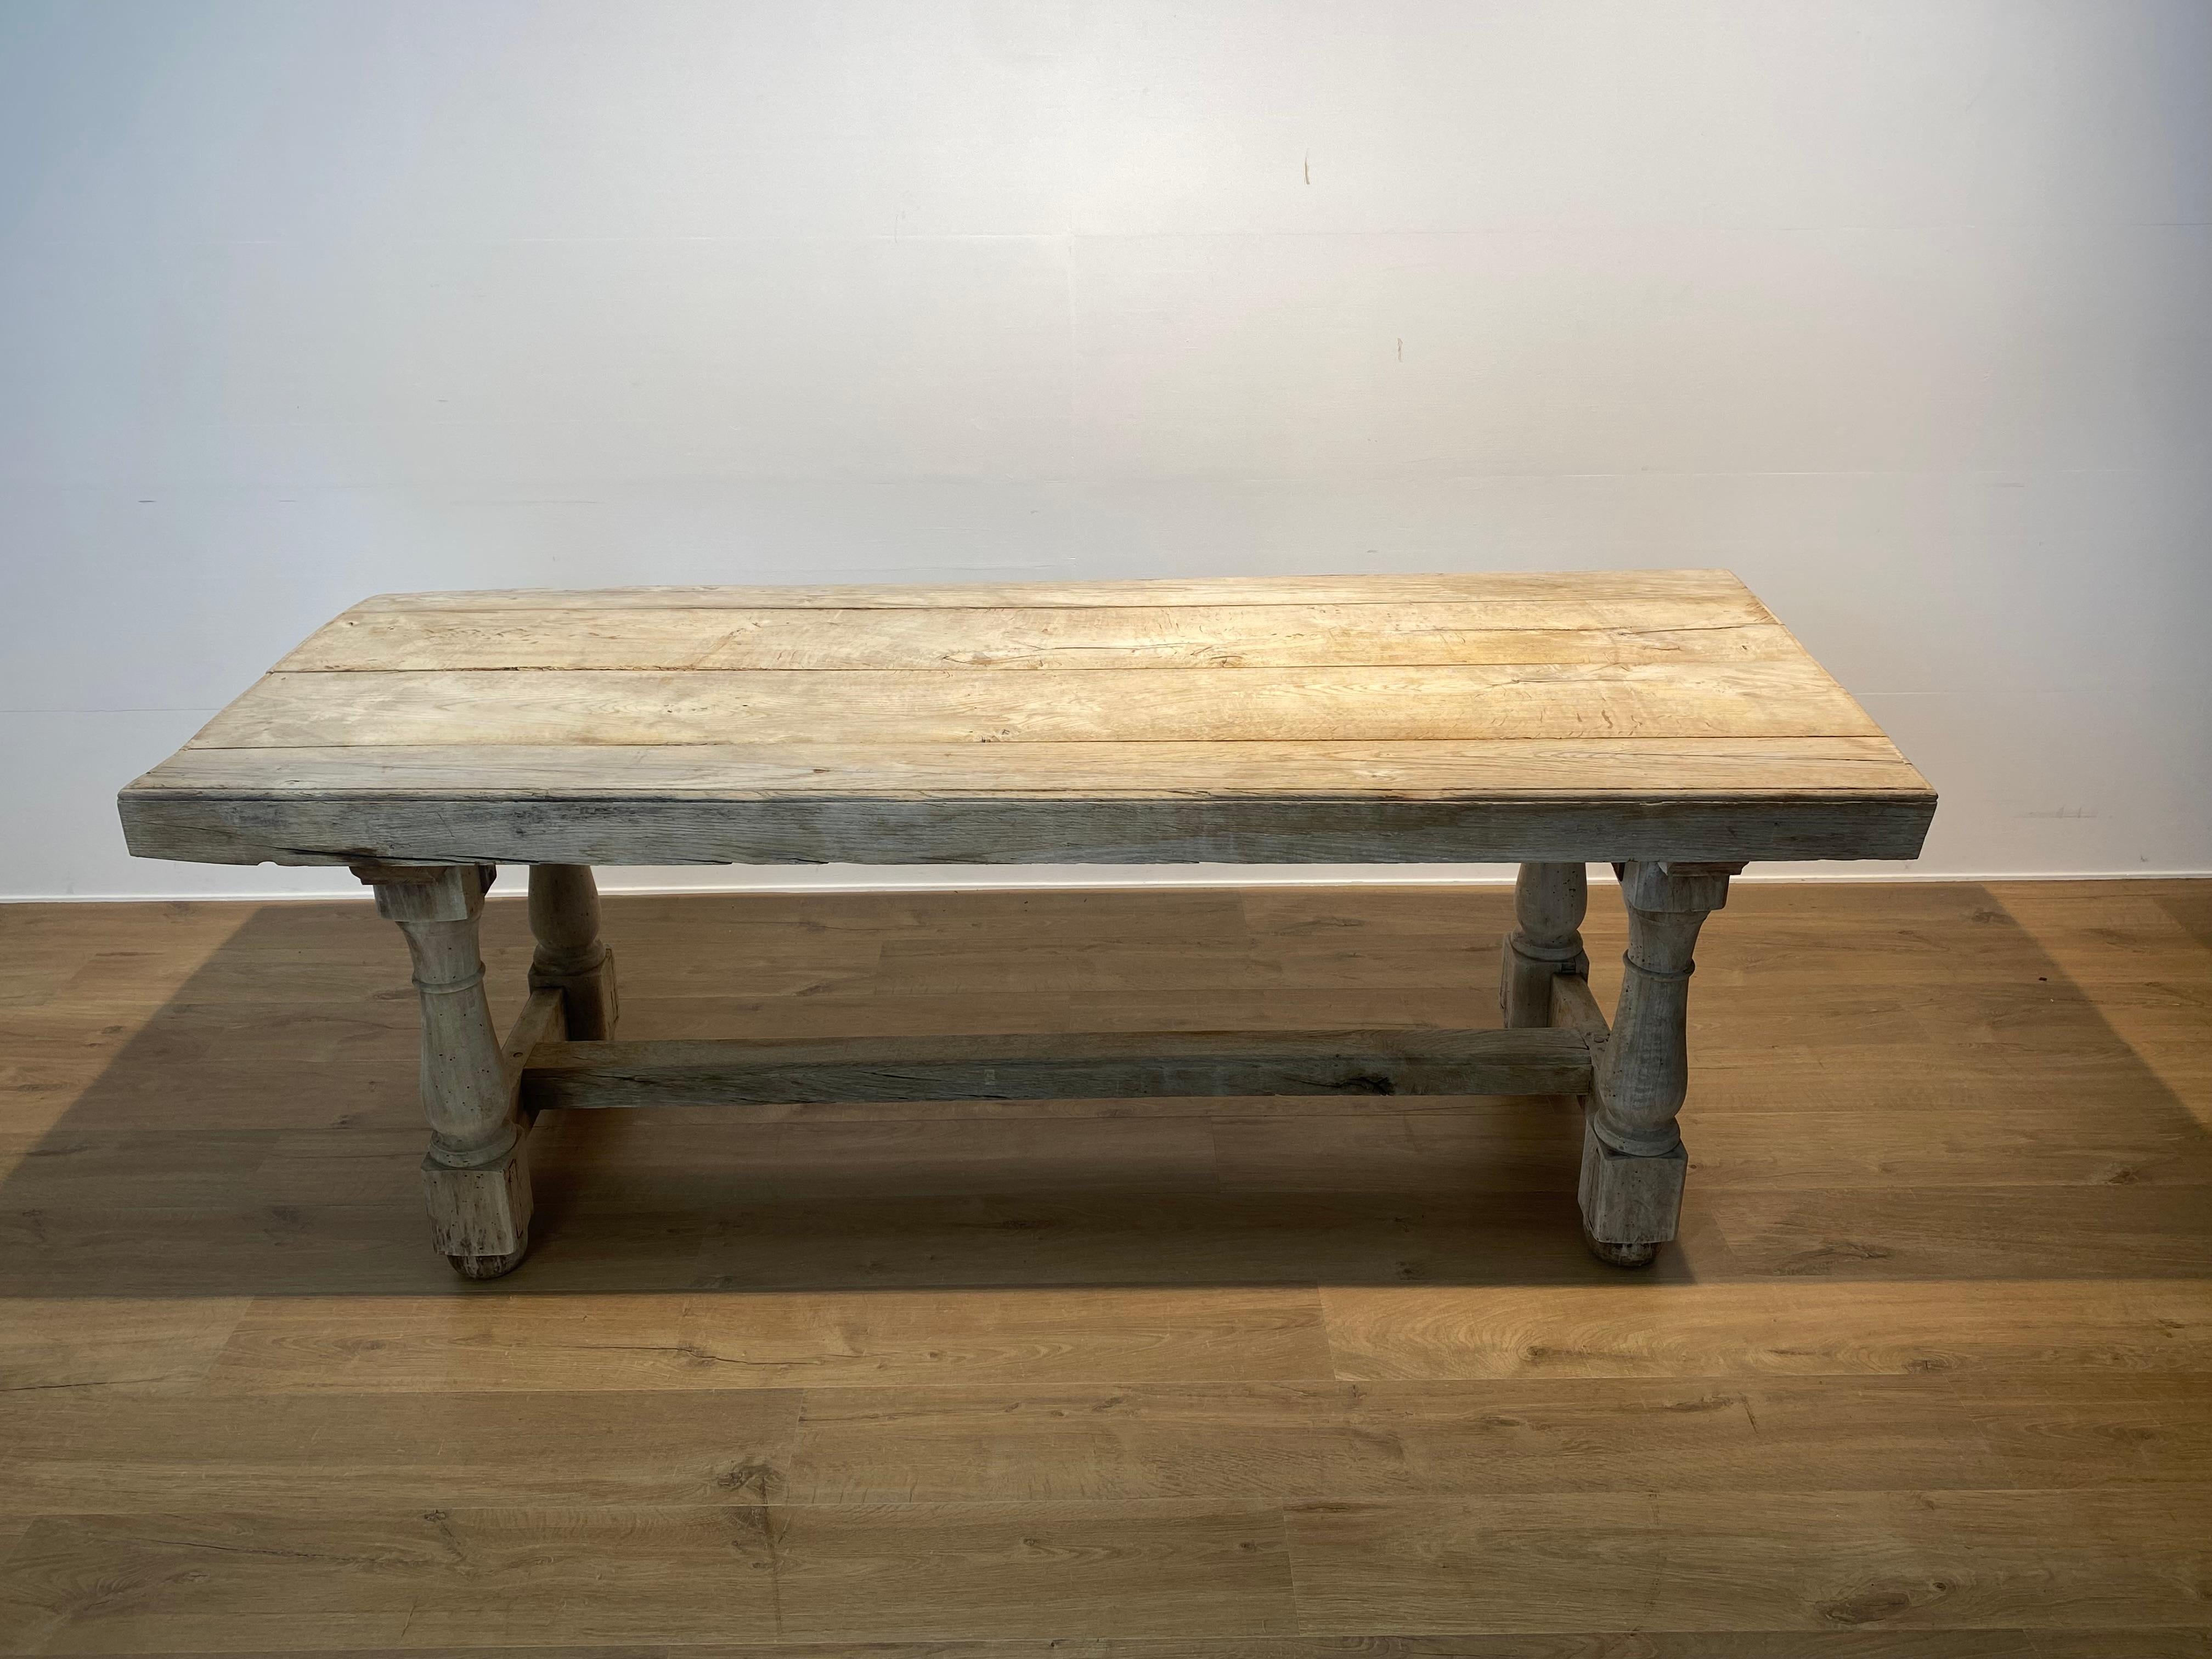 Brutalist French antique Center Table from a kitchen,
from around 1790 in a bleached Oak,
nice patina and shine of the bleached Oak,
the table top is 9 cm thick